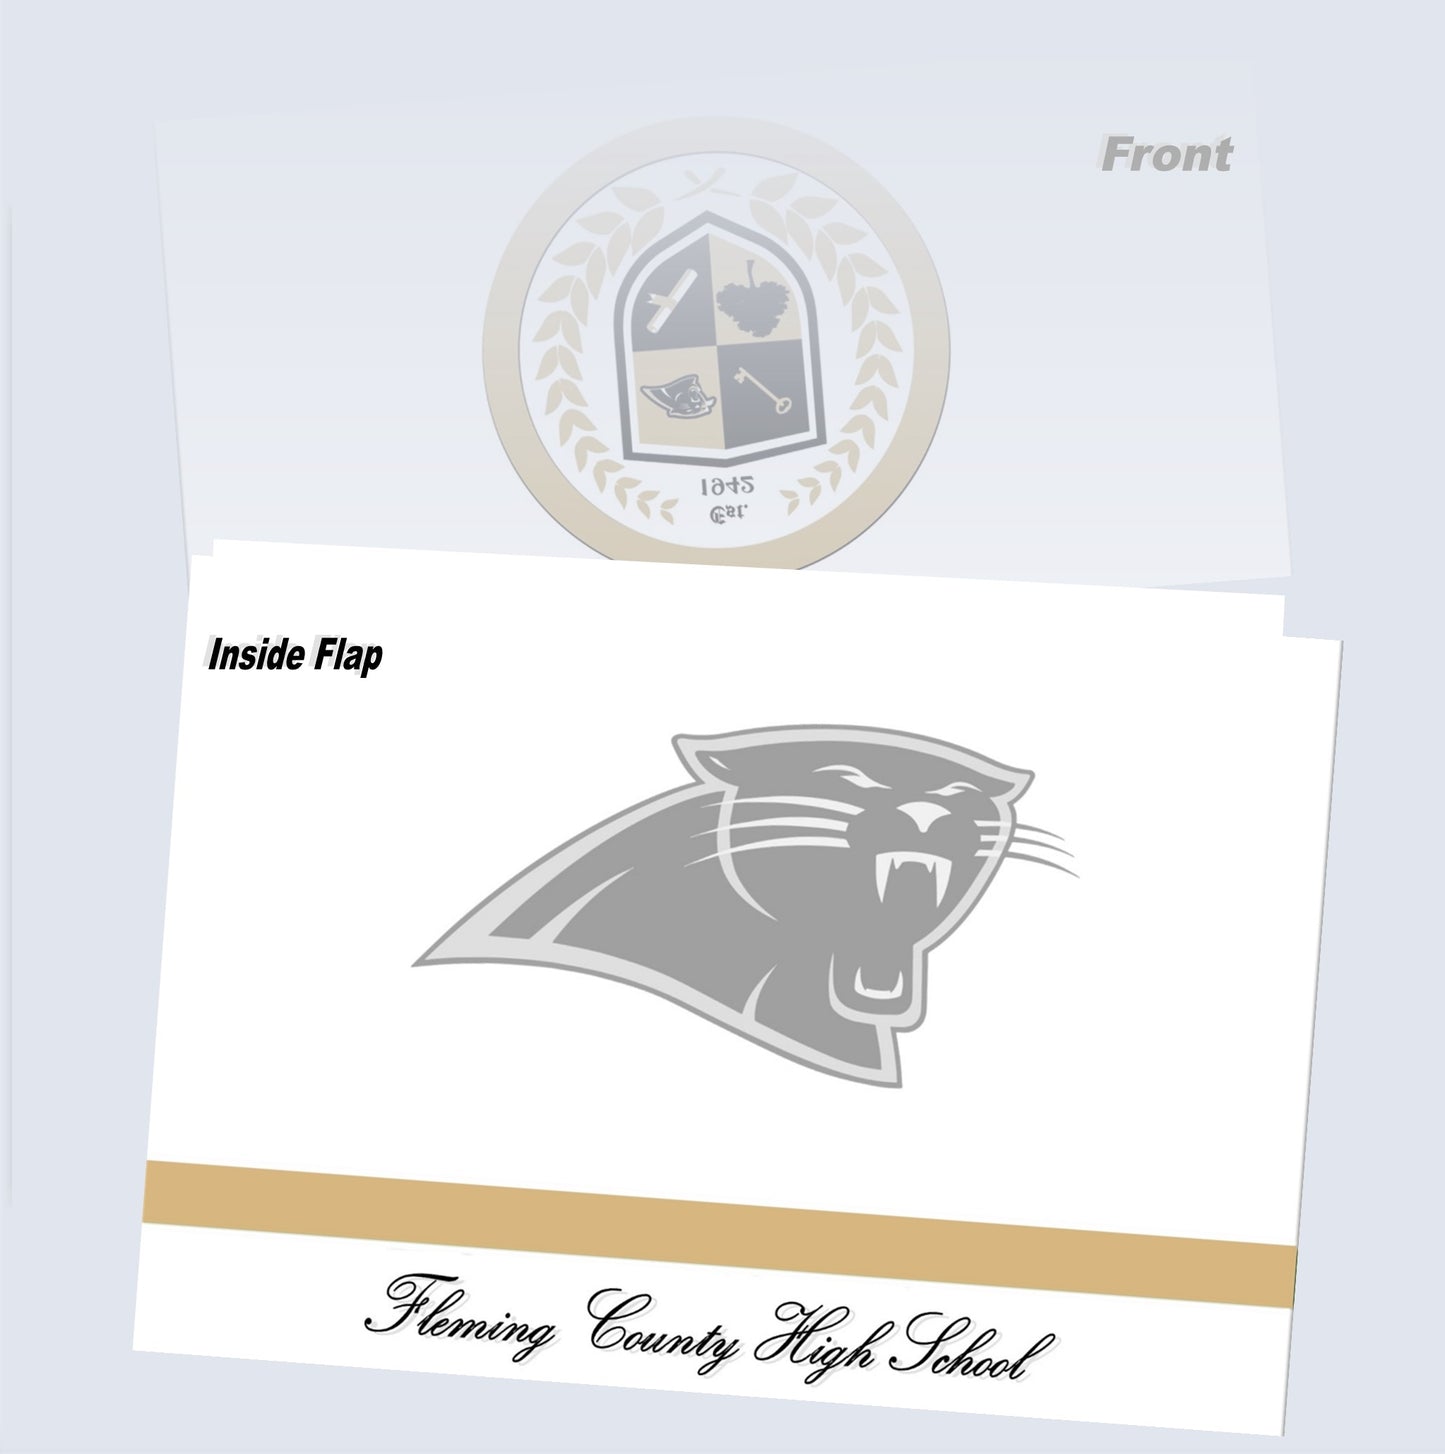 Personalized Fleming County High School Graduation Announcements